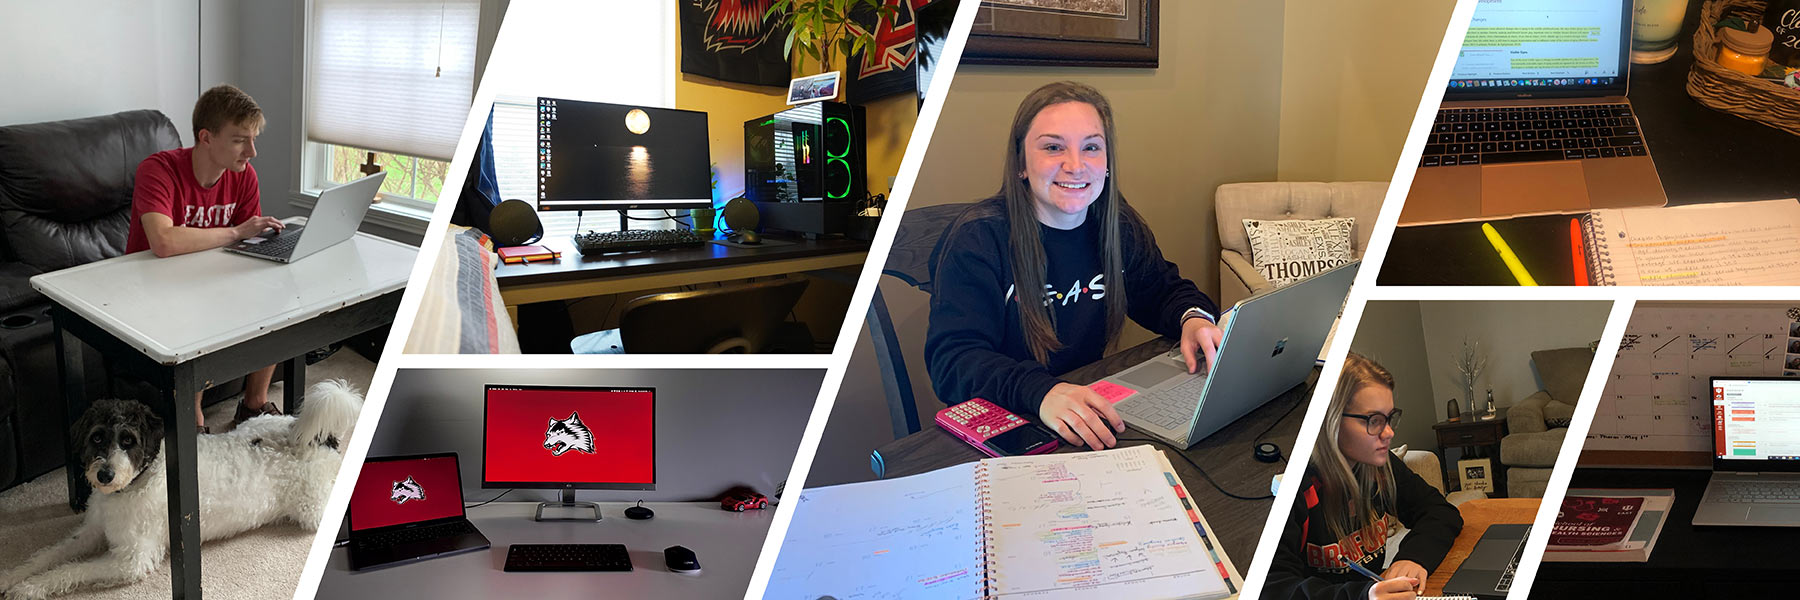 Collage of students and their home work spaces.